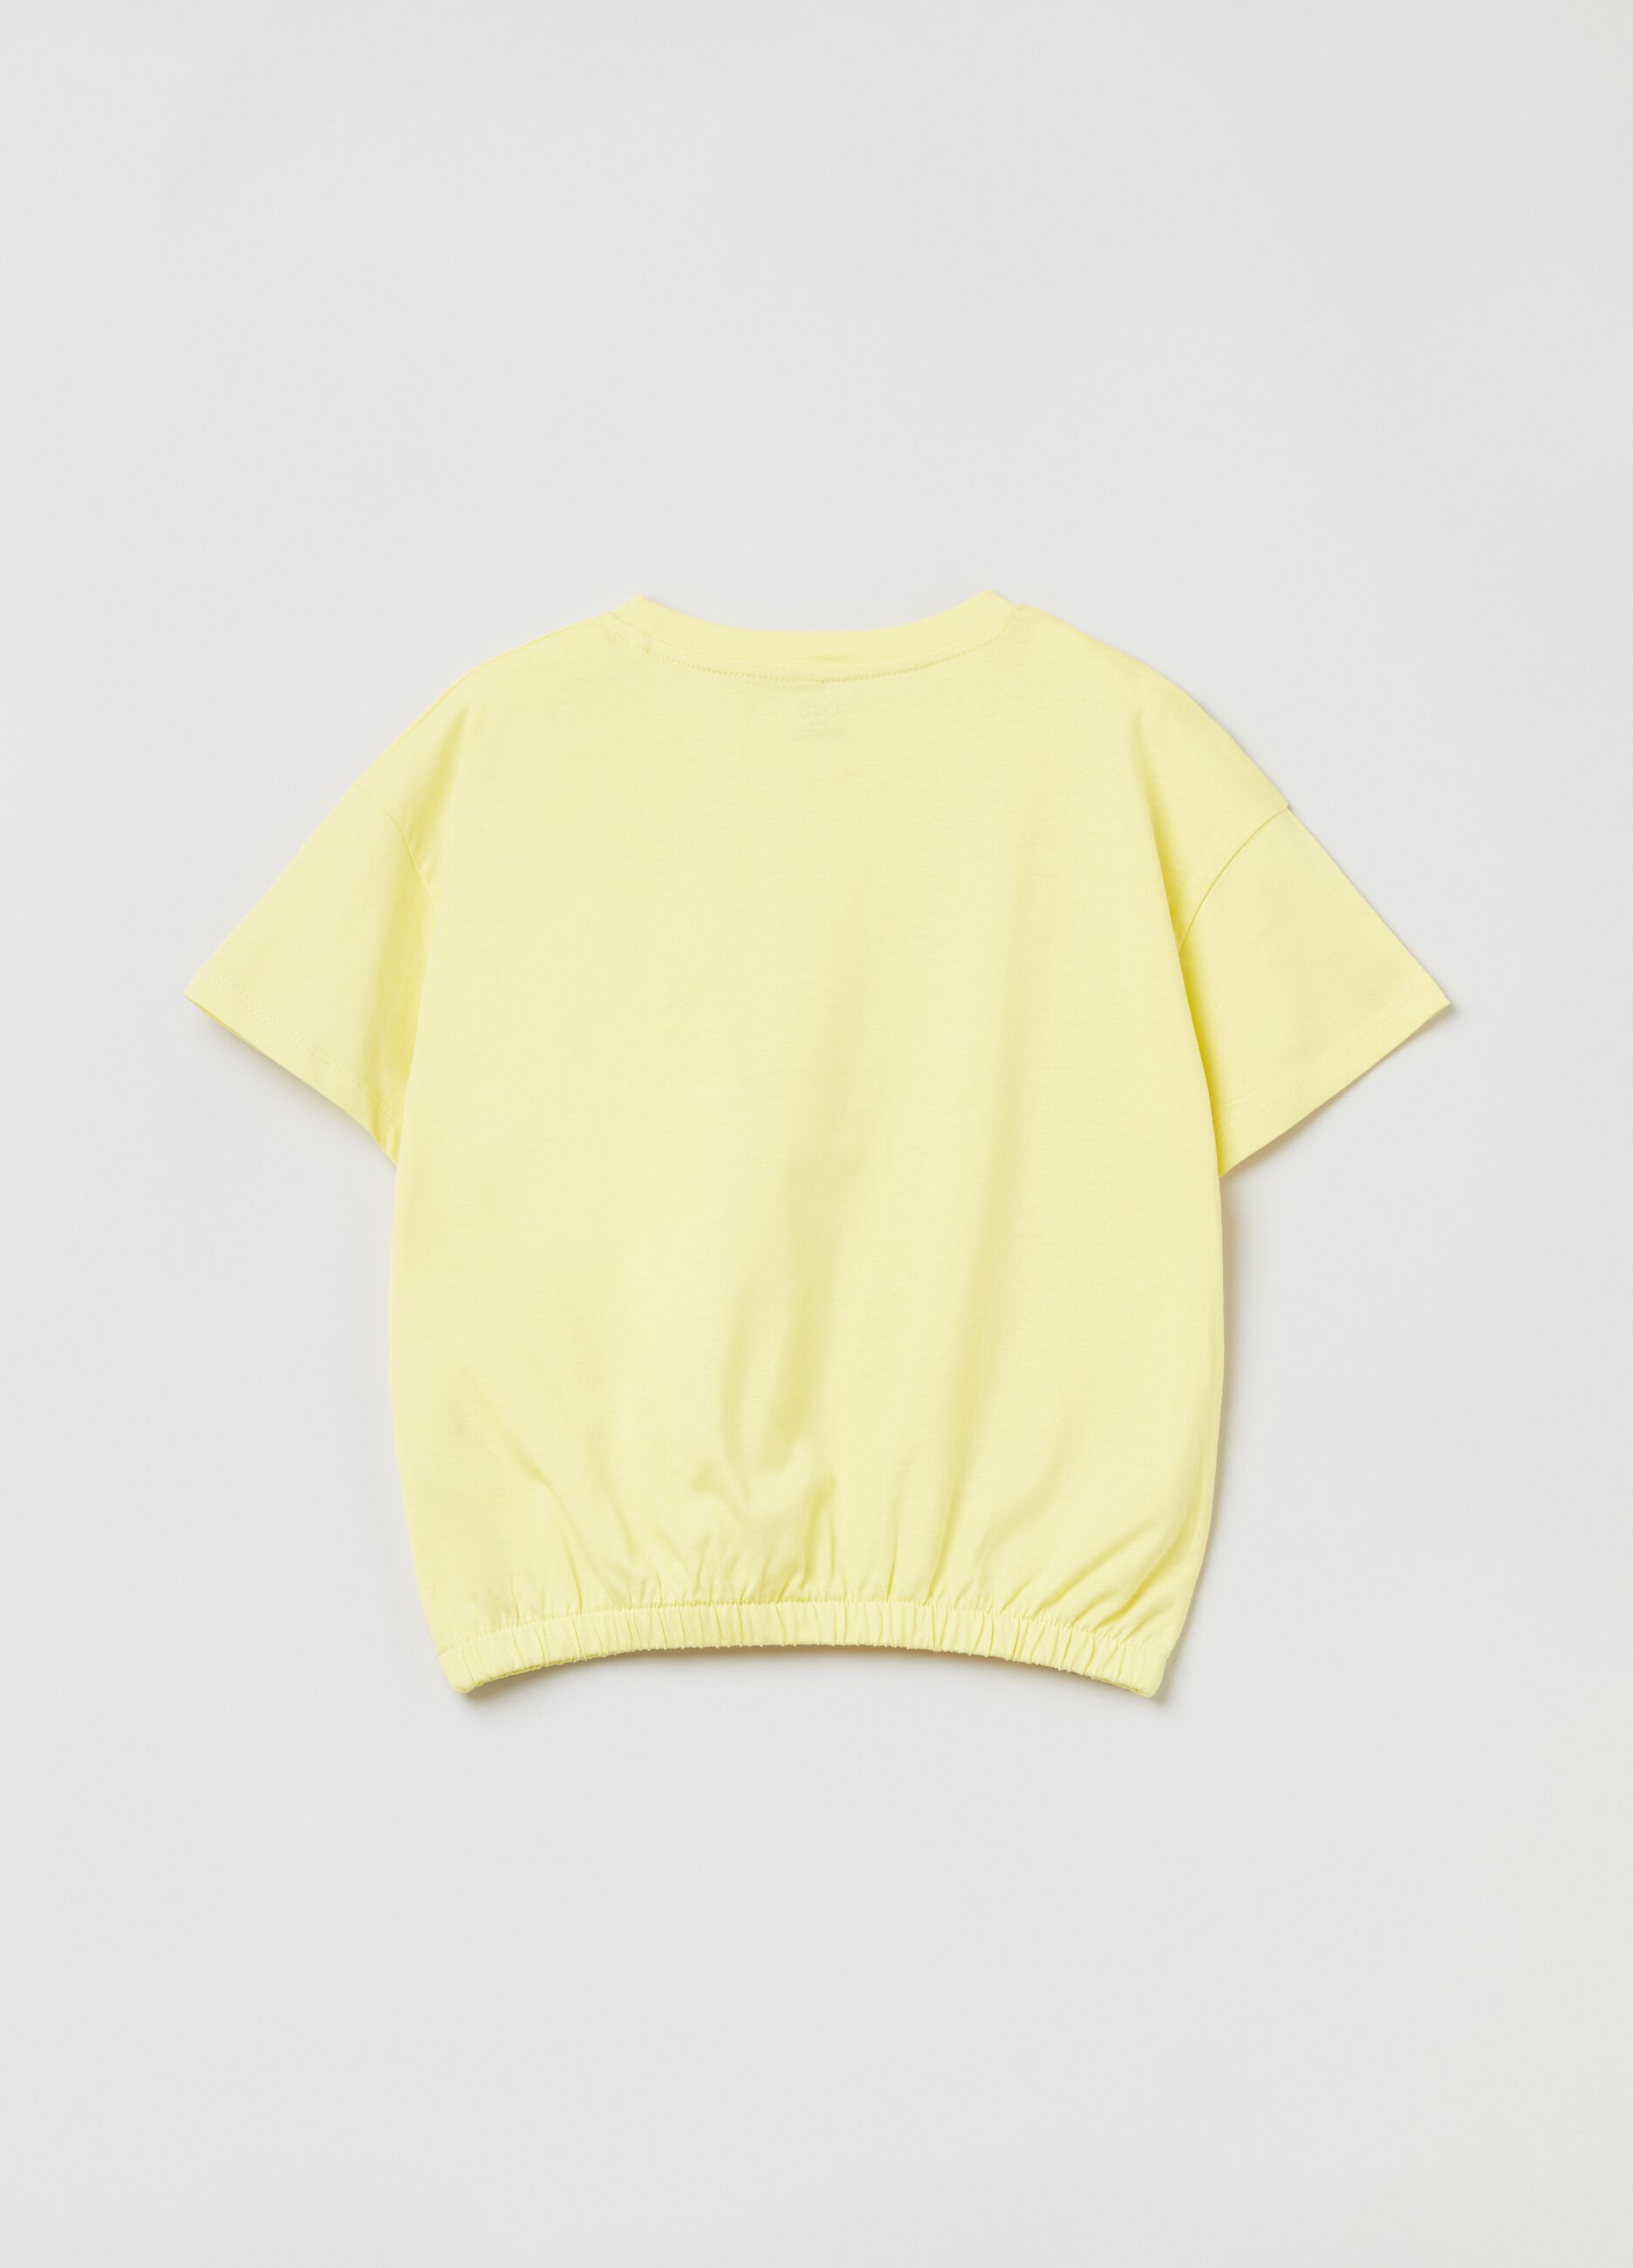 Cotton T-shirt with elastic waist band